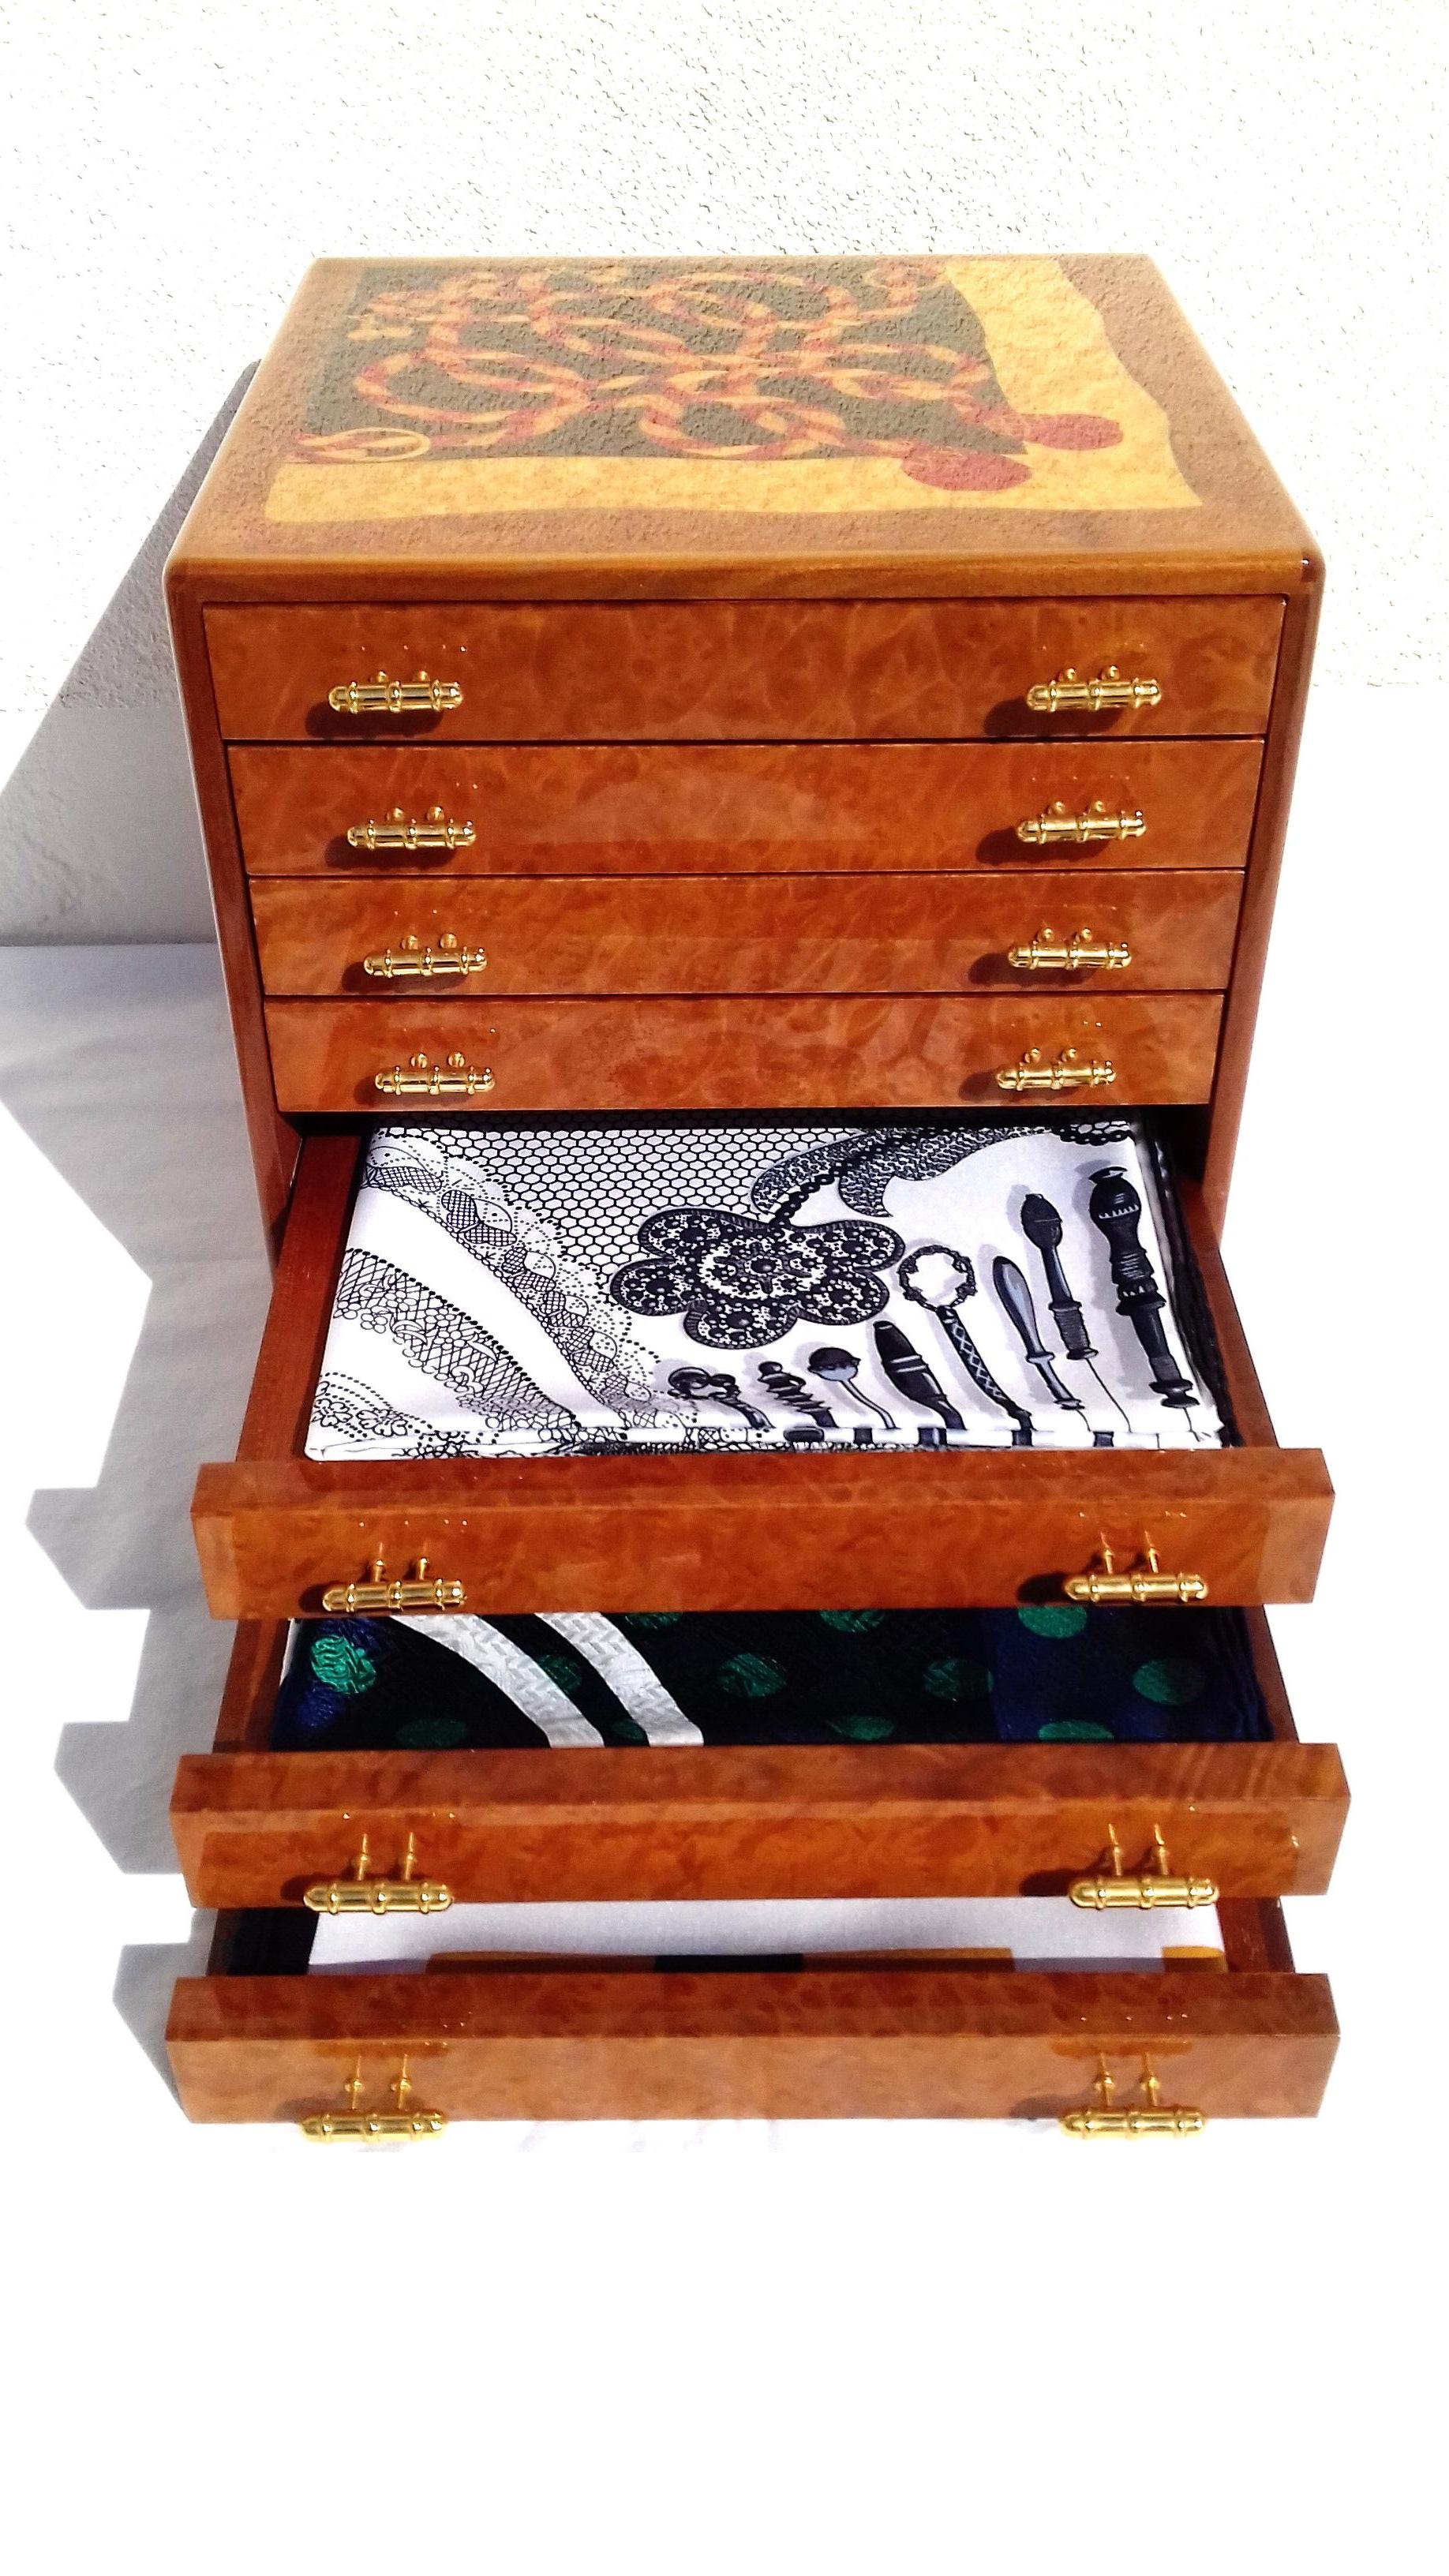 Women's Exceptional Hermès Drawer to store scarves or Jewelry In Wood Inlaid RARE